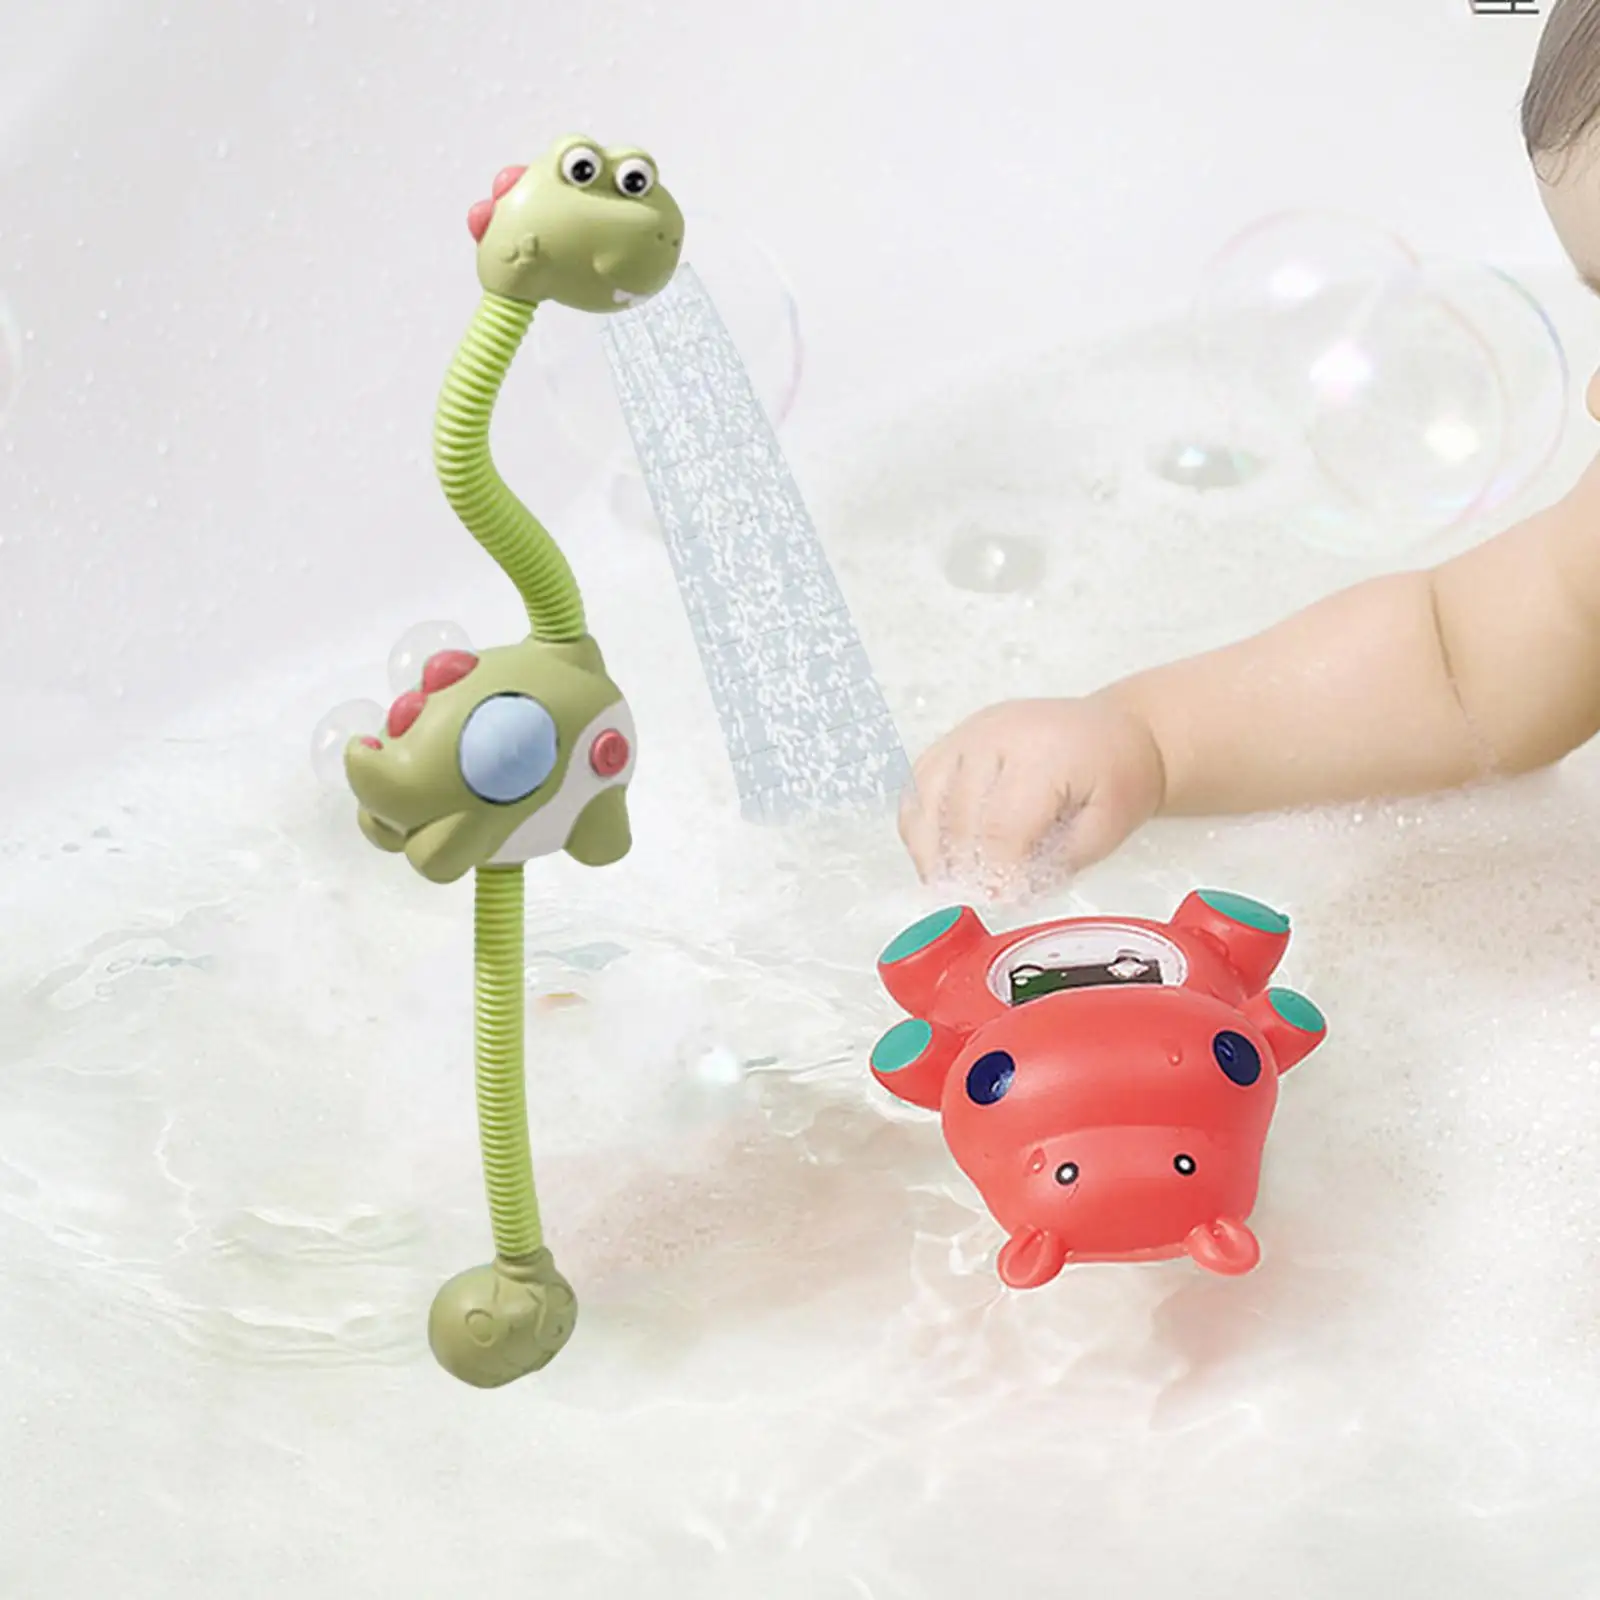 Infant Electric Shower Automatic Water Pump with Hand Shower Bathtub Toy for Bathroom Birthday Gift Infants Toddles Kids